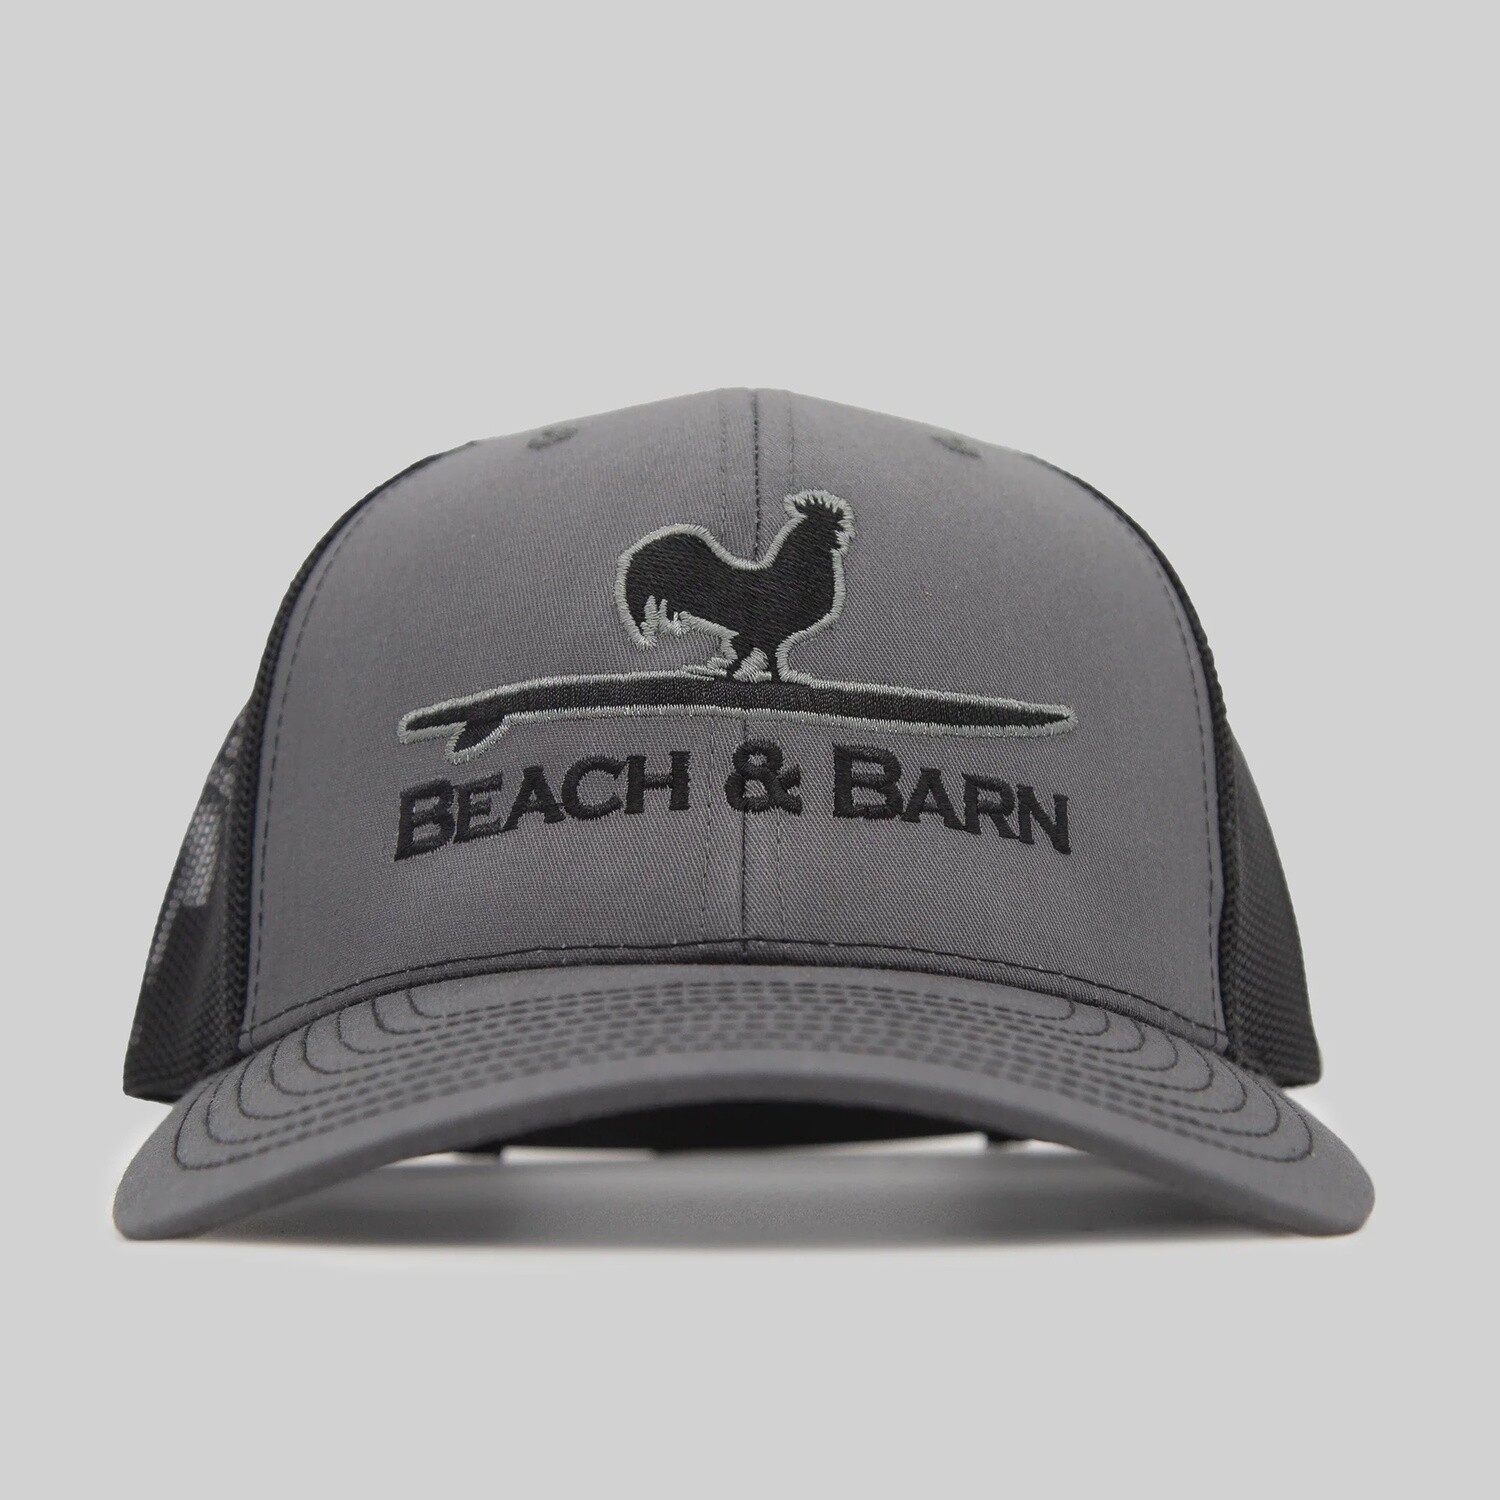 Beach and Barn - Surfing Rooster Snapback - Charcoal/Black